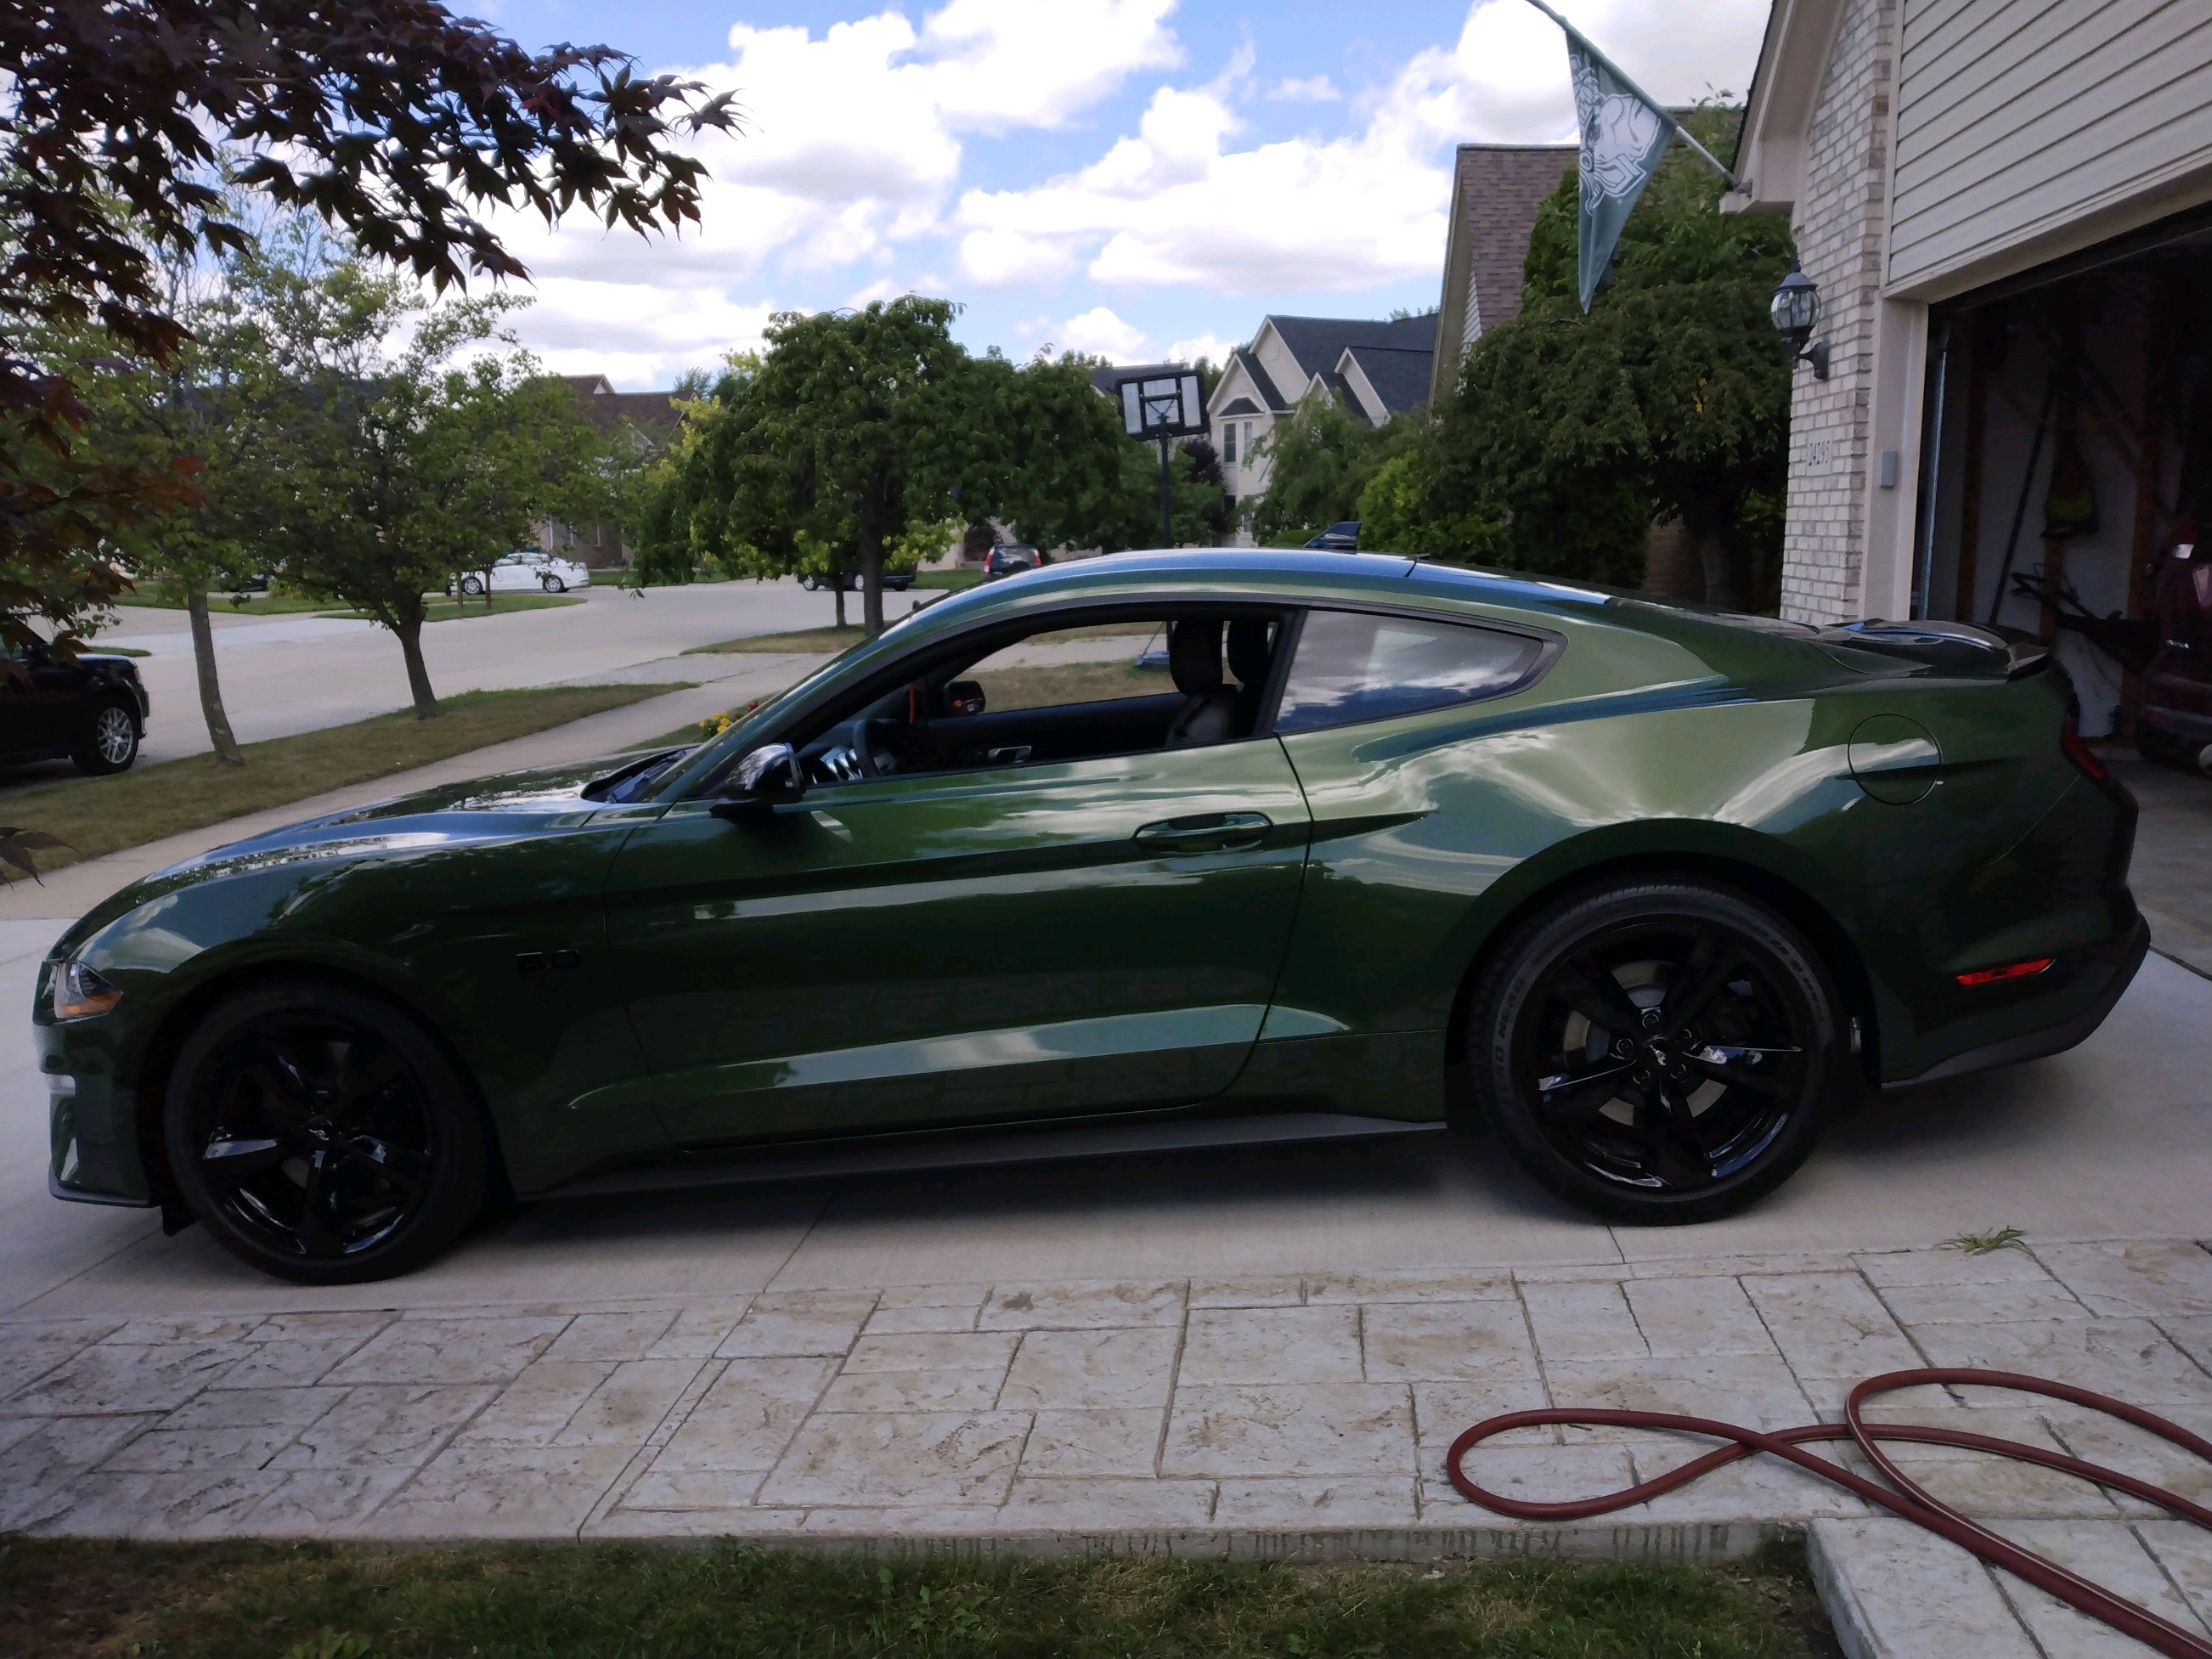 ERUPTION GREEN S550 MUSTANG Thread | Page 20 | 2015+ S550 Mustang Forum ...